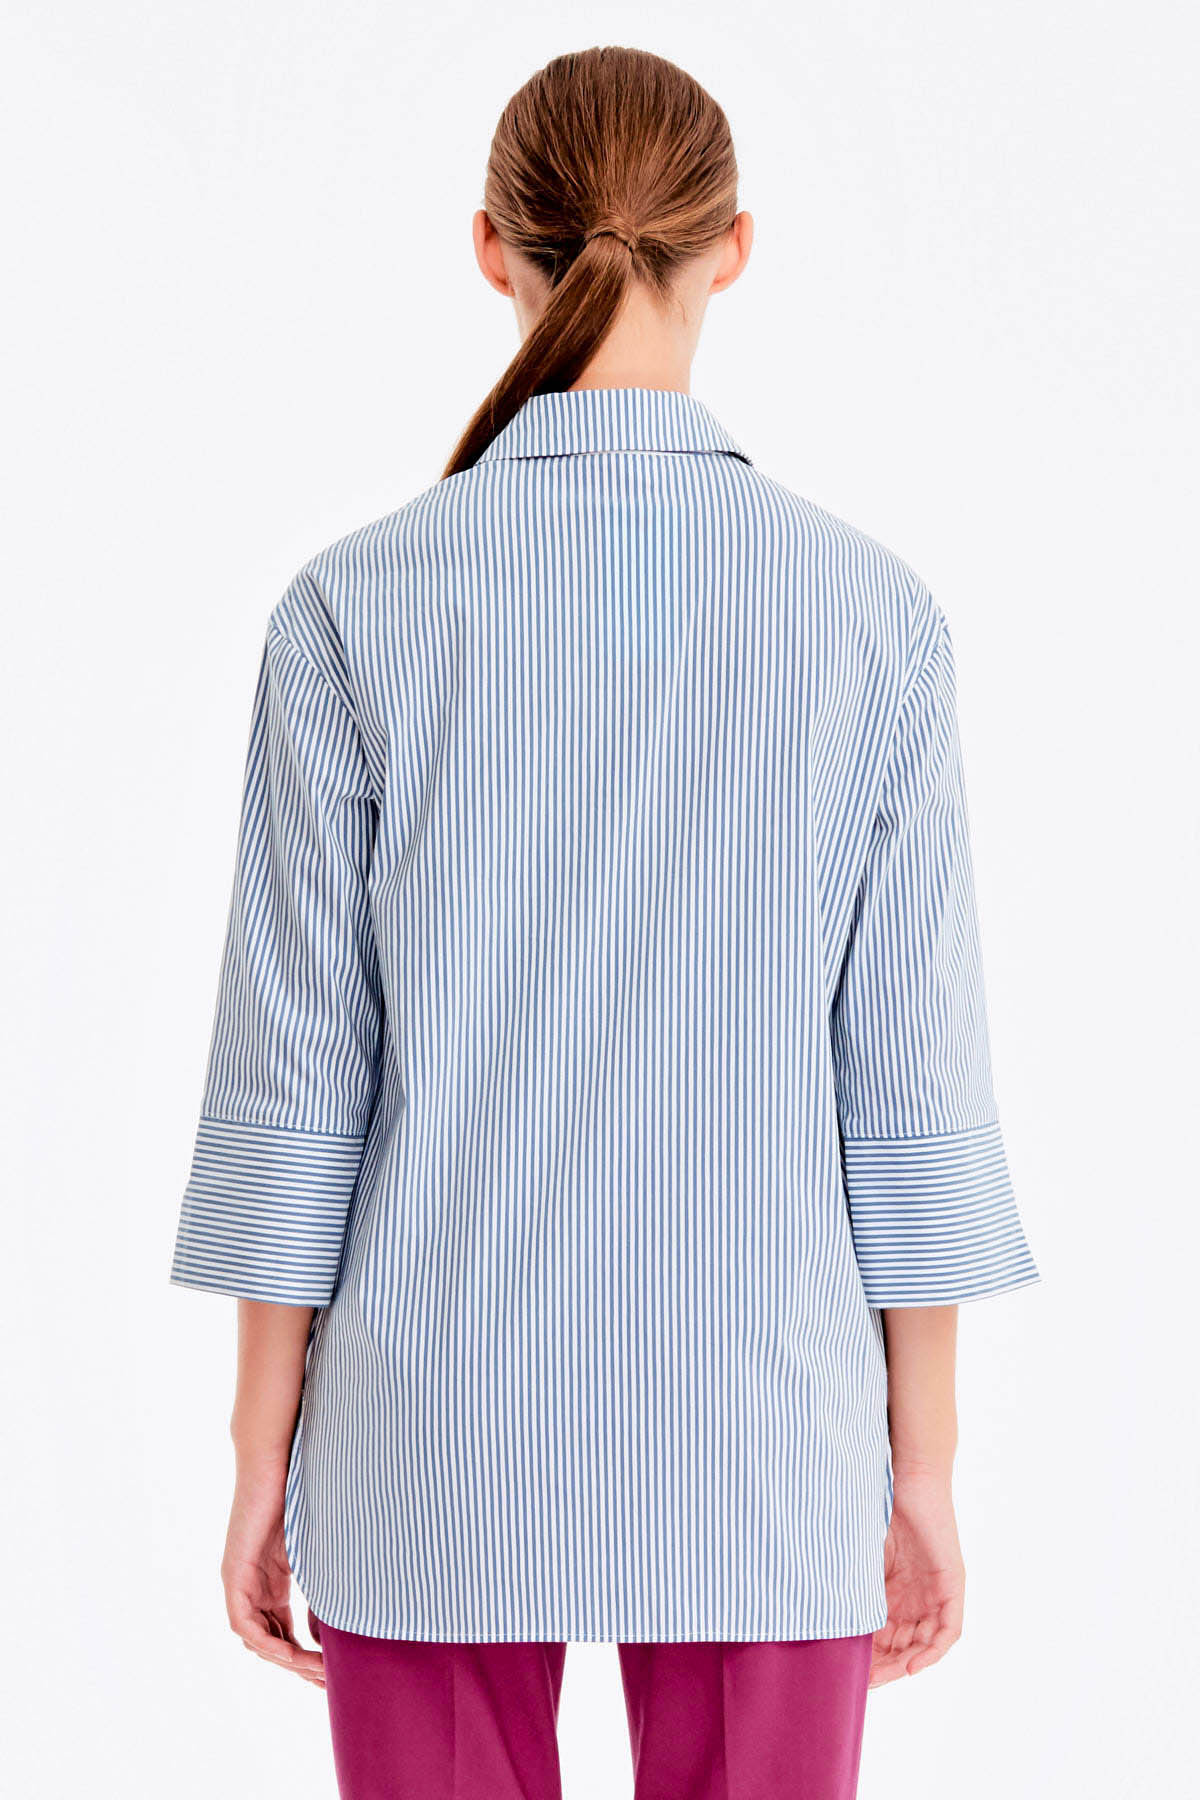 Striped shirt with slits, photo 12